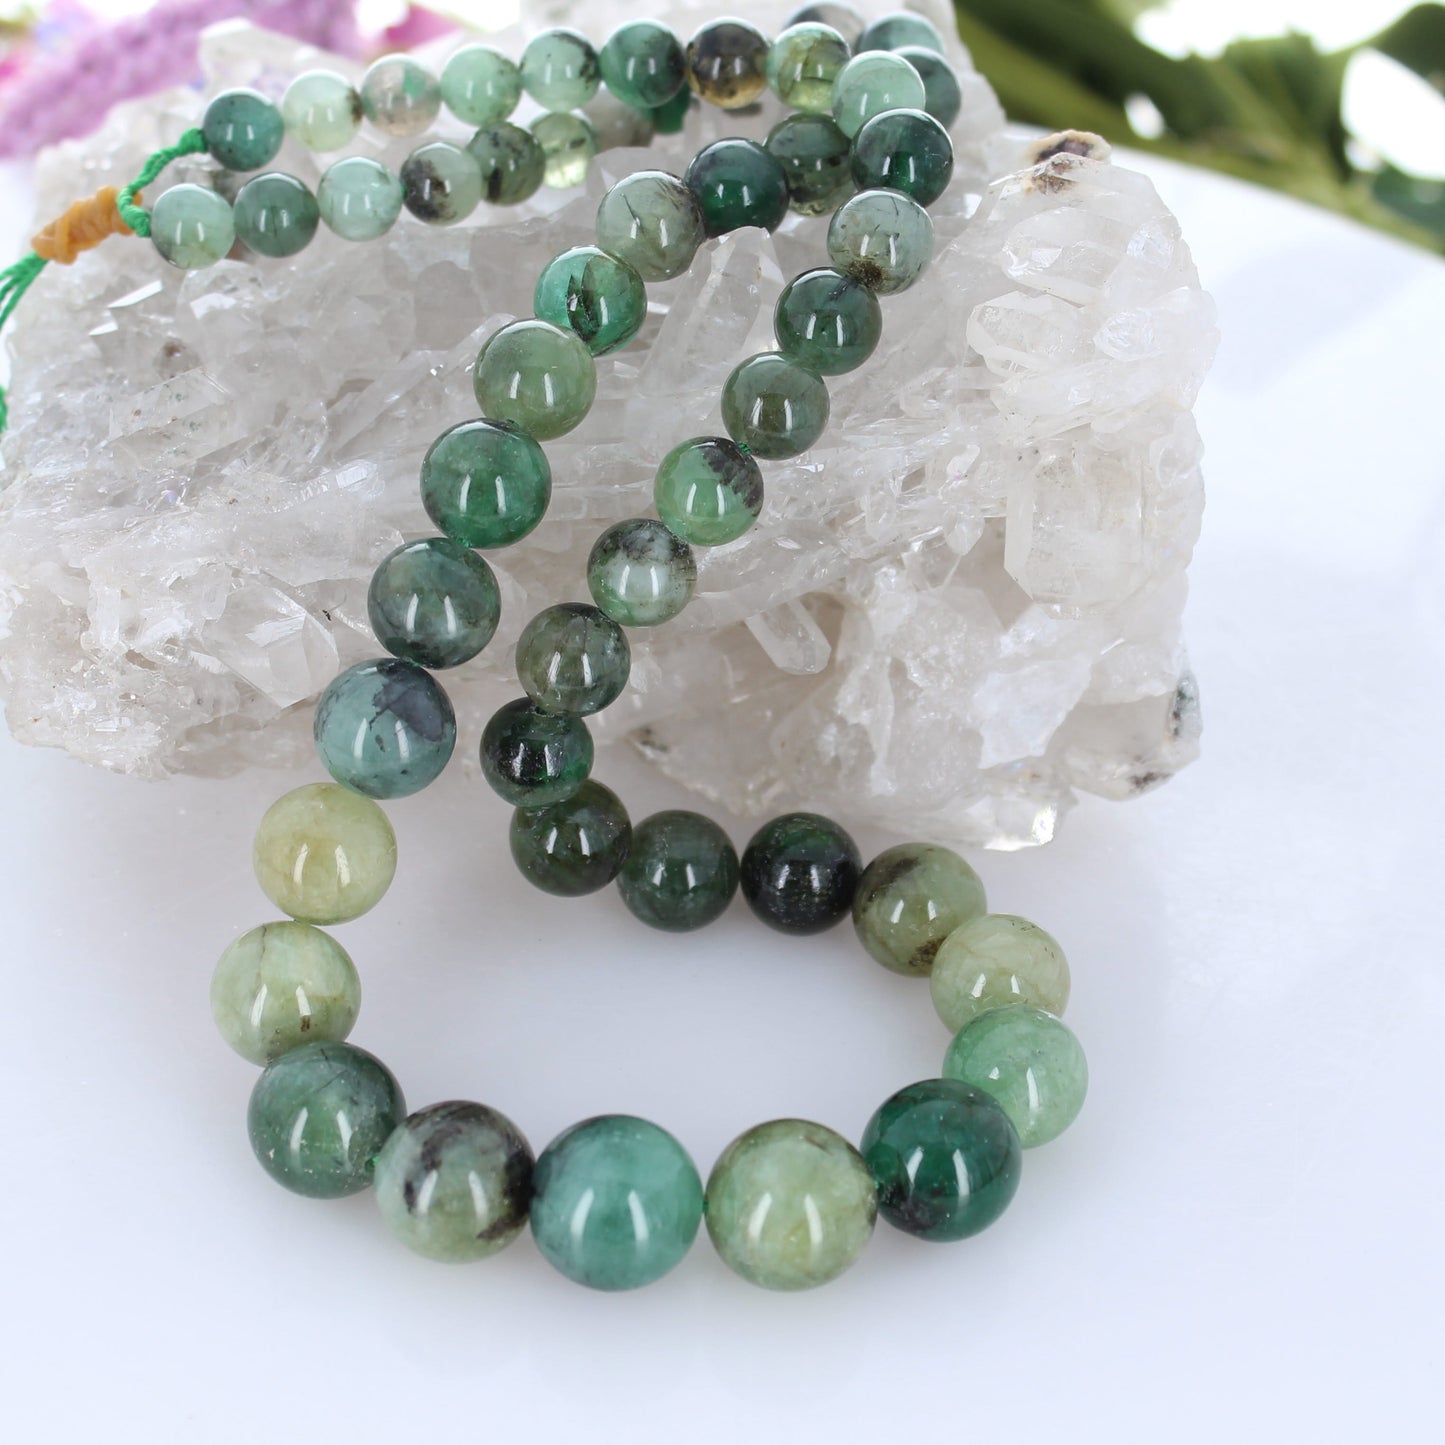 Genuine Emerald Beads Graduated Rounds Shaped 8 to 16mm 20"